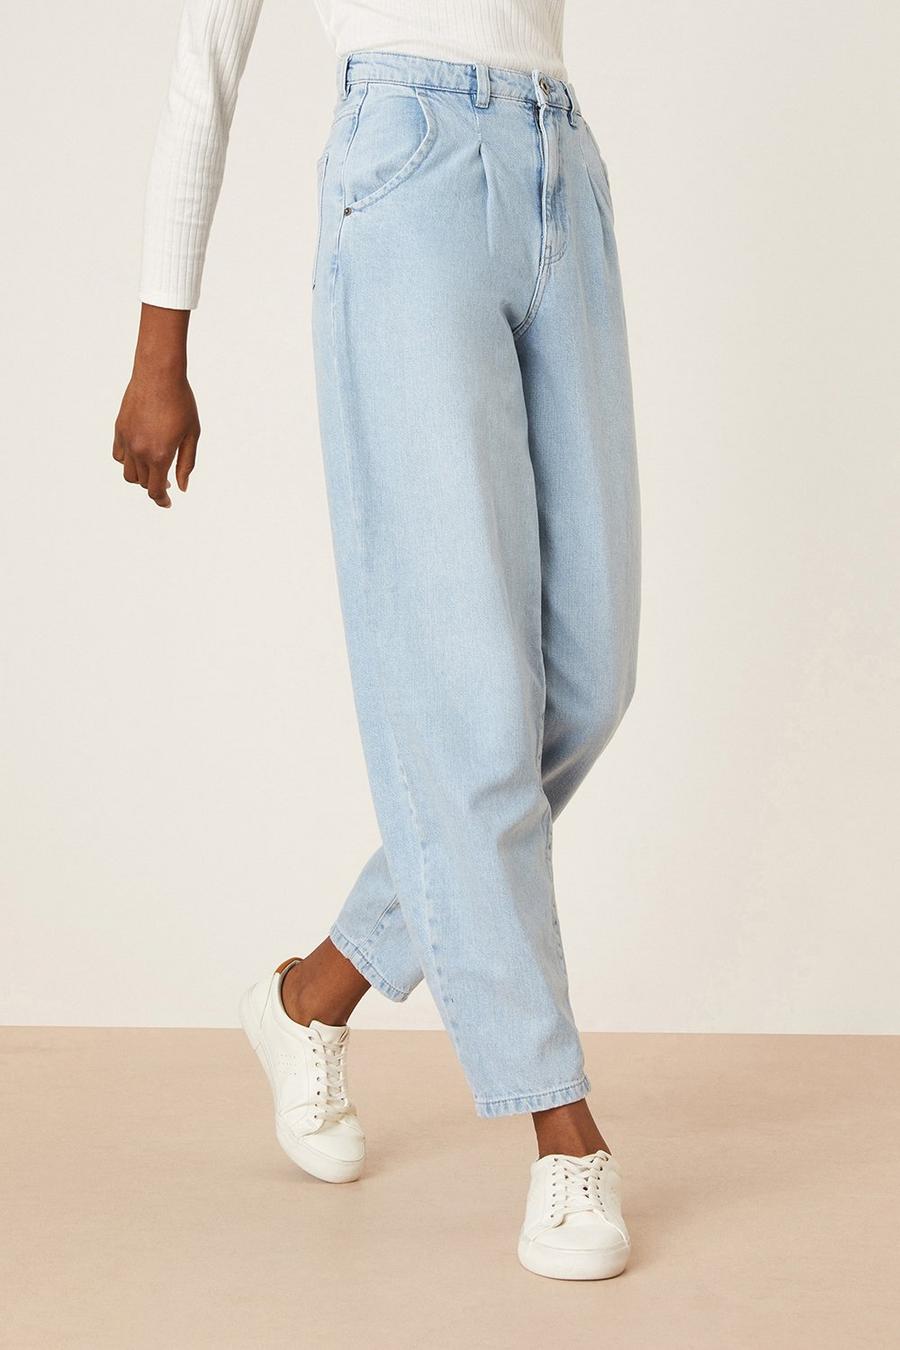 Tall More Sustainable Hemp Denim Slouch Jeans